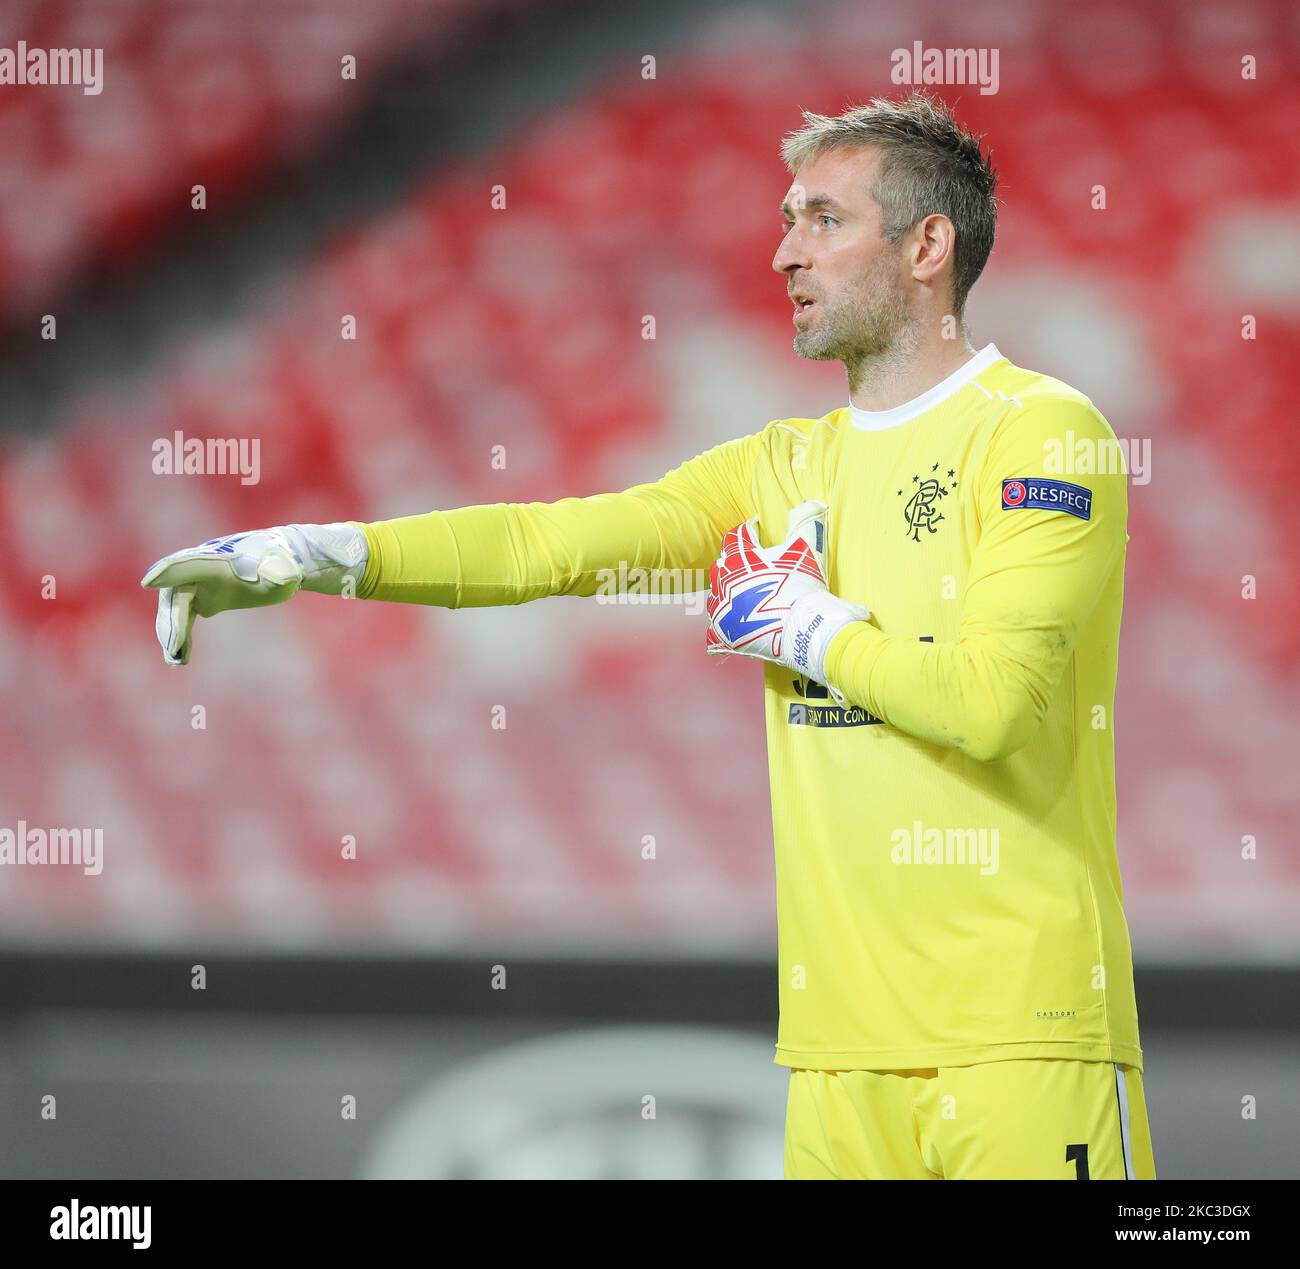 Allan McGregor of Rangers FC in action during the UEFA Europa League Group D stage match between SL Benfica and Rangers FC at Estadio da Luz on November 5, 2020 in Lisbon, Portugal. (Photo by Paulo Nascimento/NurPhoto) Stock Photo